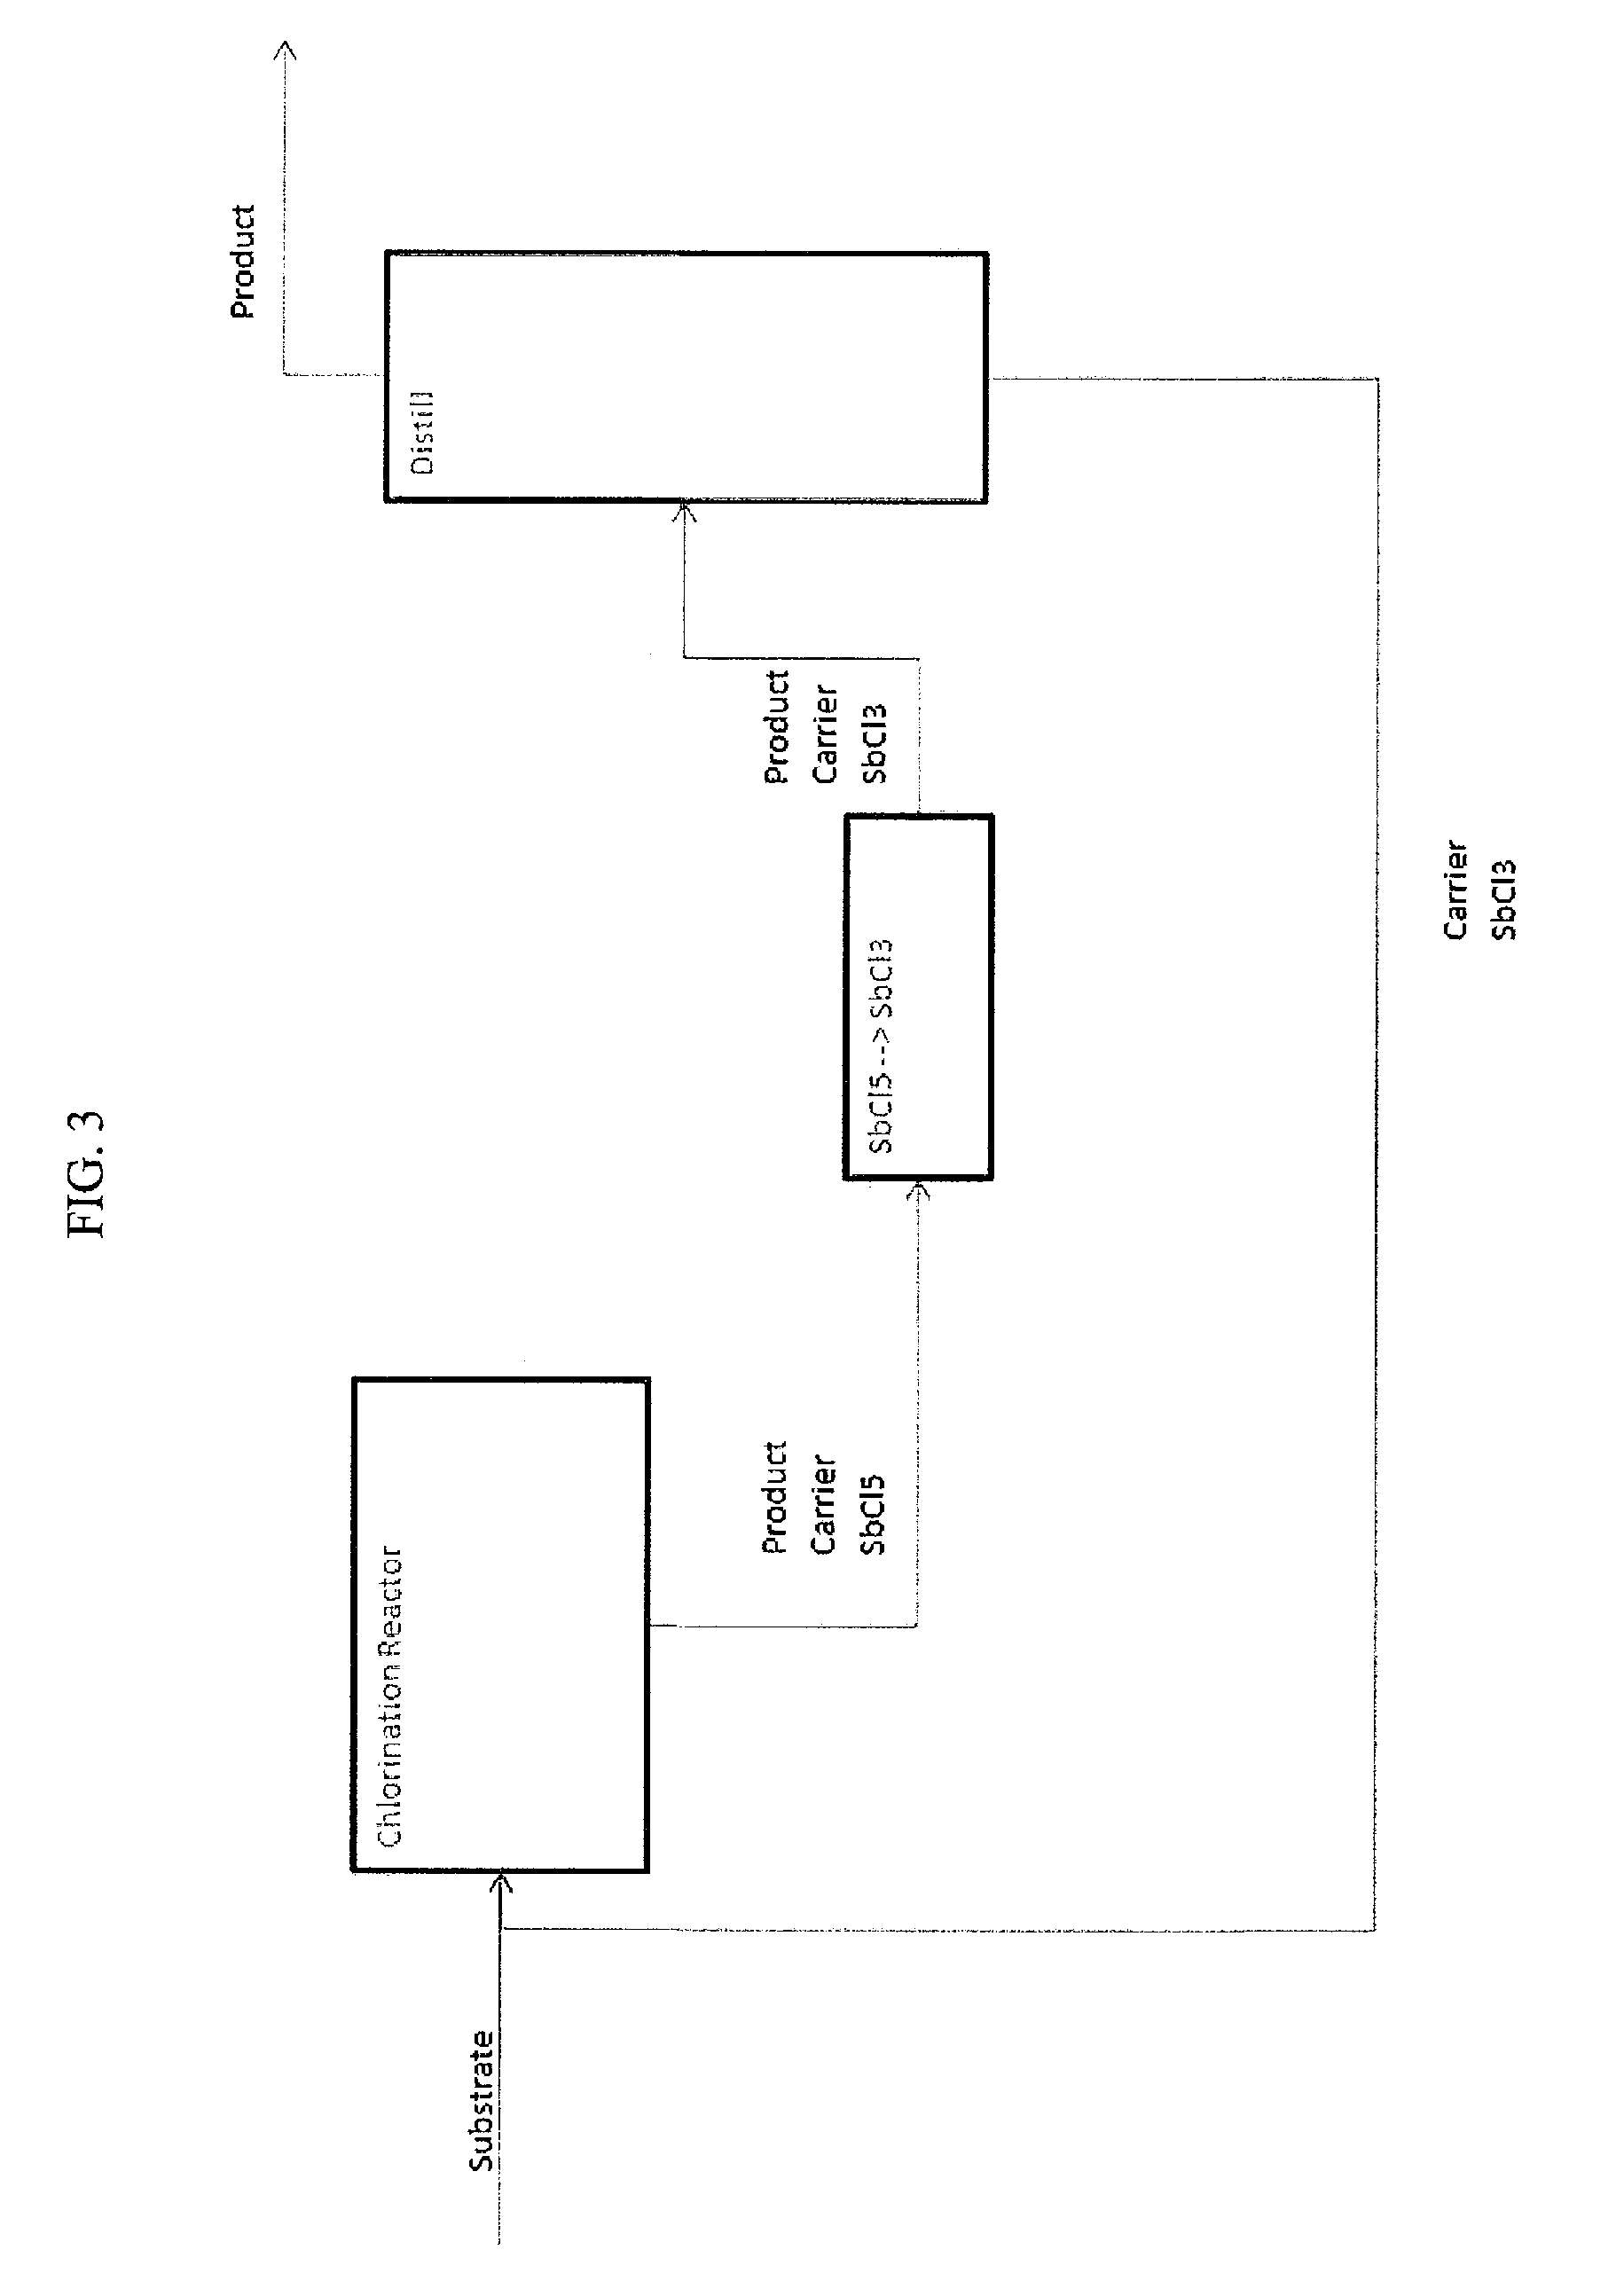 Processes for producing chlorinated hydrocarbons and methods for recovering polyvalent antimony catalysts therefrom